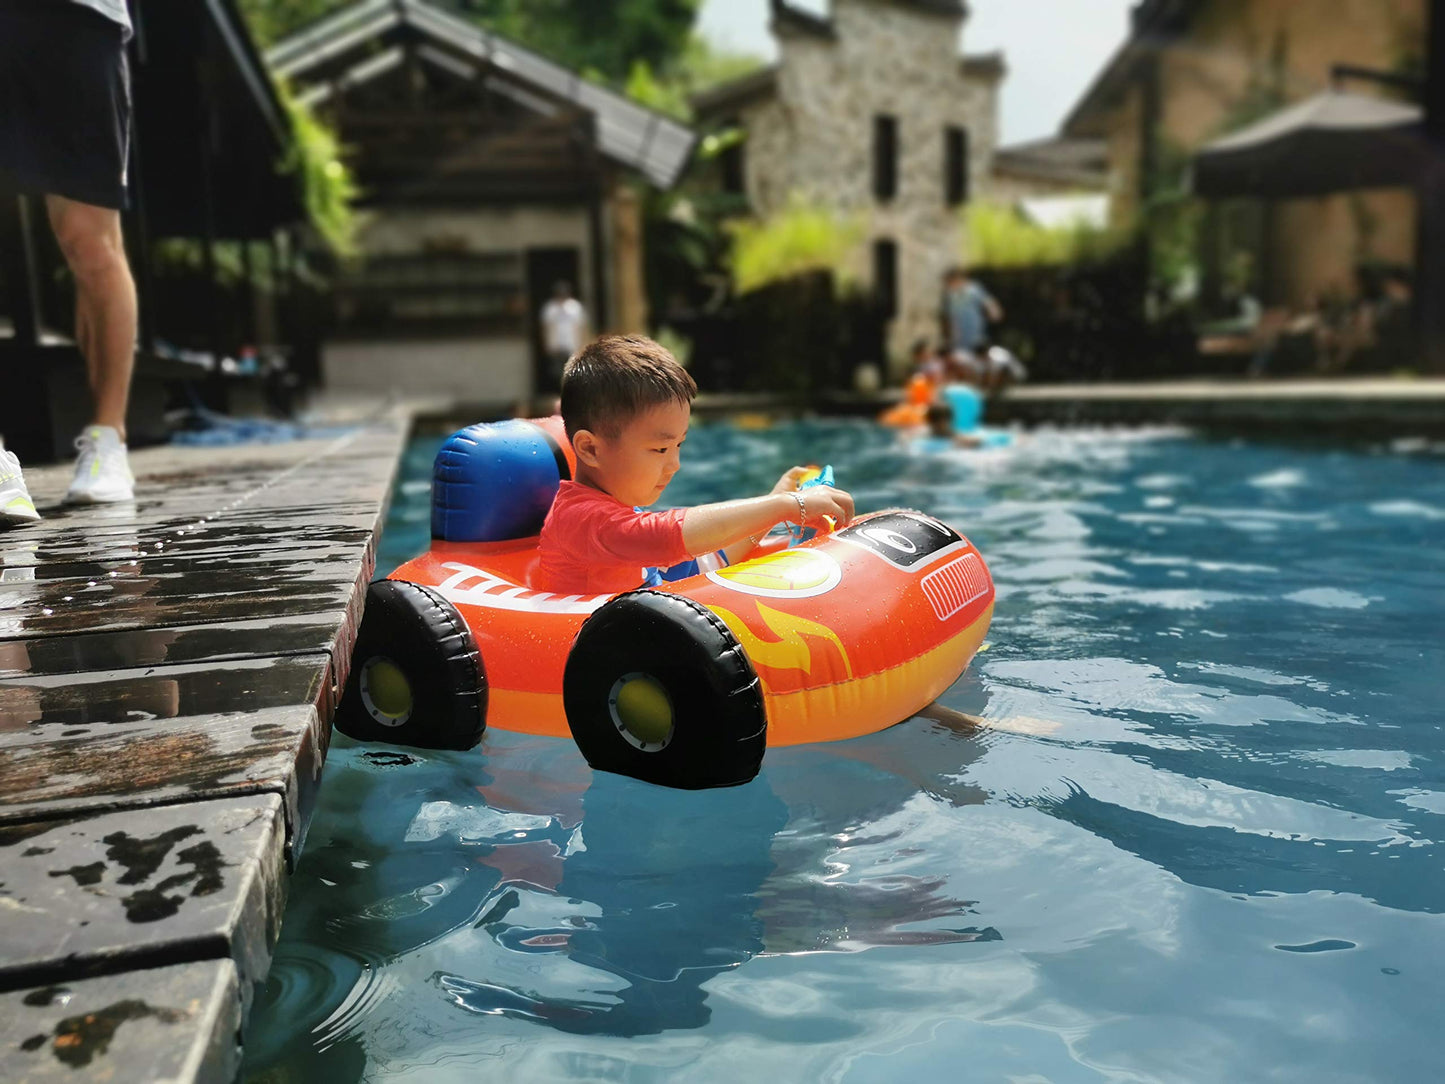 Big Summer Inflatable Fire Boat Pool Float for Kids with Built-in Squirt Gun, Inflatable Ride-on for Children Aged 3-7 Years Fire Truck Float